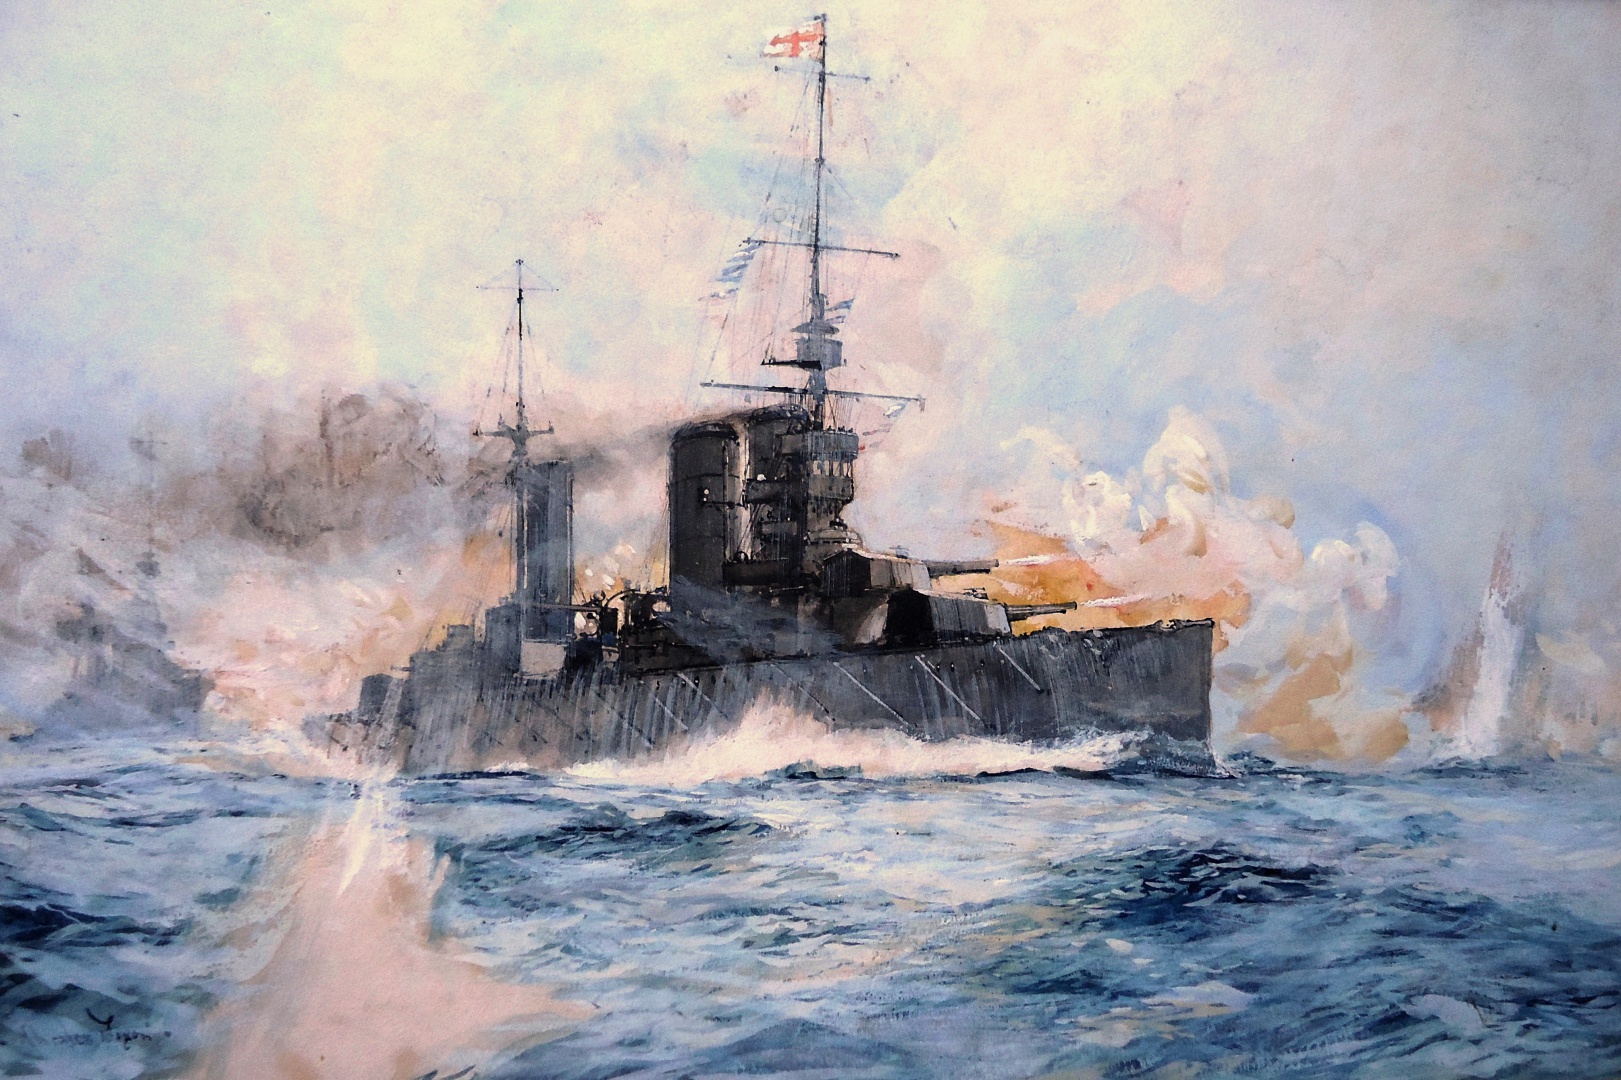 HMS LION in action, Heligoland, 28th August 1914